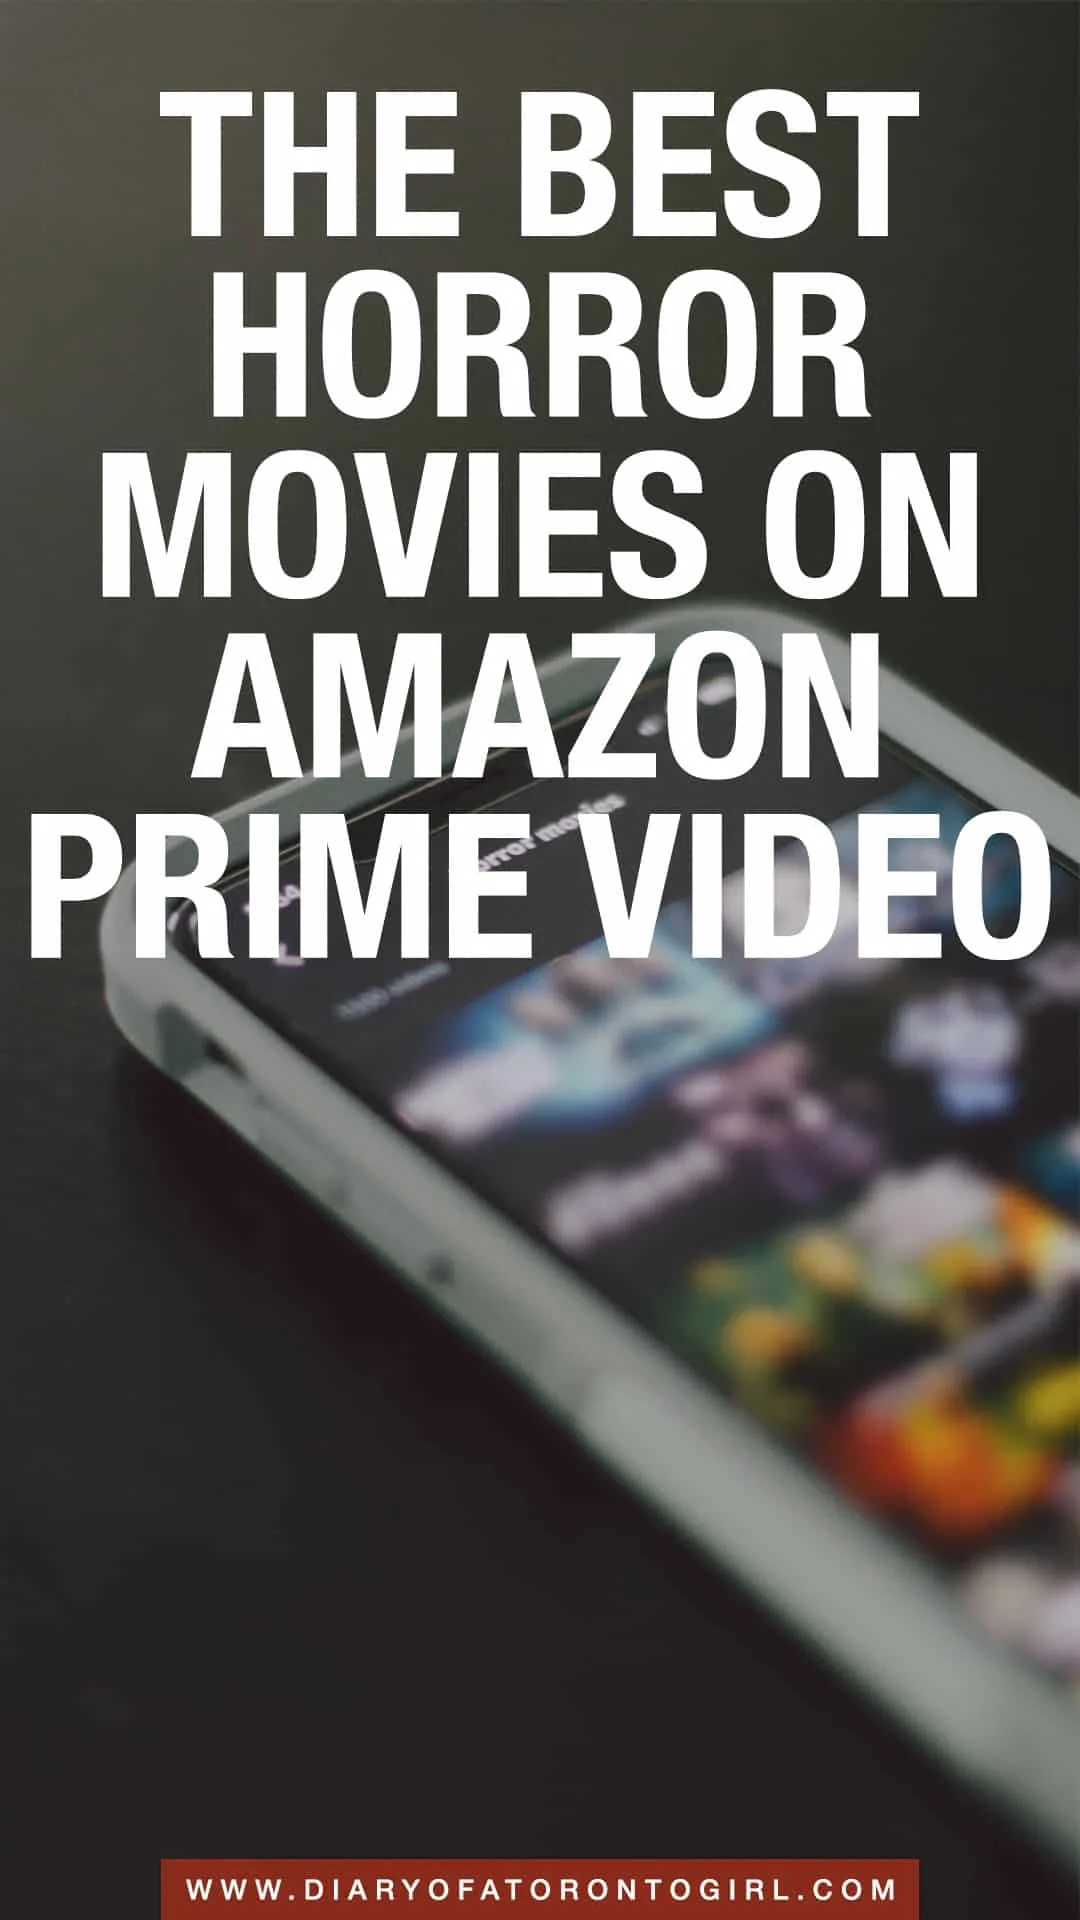 Looking for things to watch on Amazon Prime Video? Here are the best horror movies on Amazon Prime Video Canada for Canadians to binge-watch, whether you're into creepy thrillers, gory slashers, or supernatural horrors!